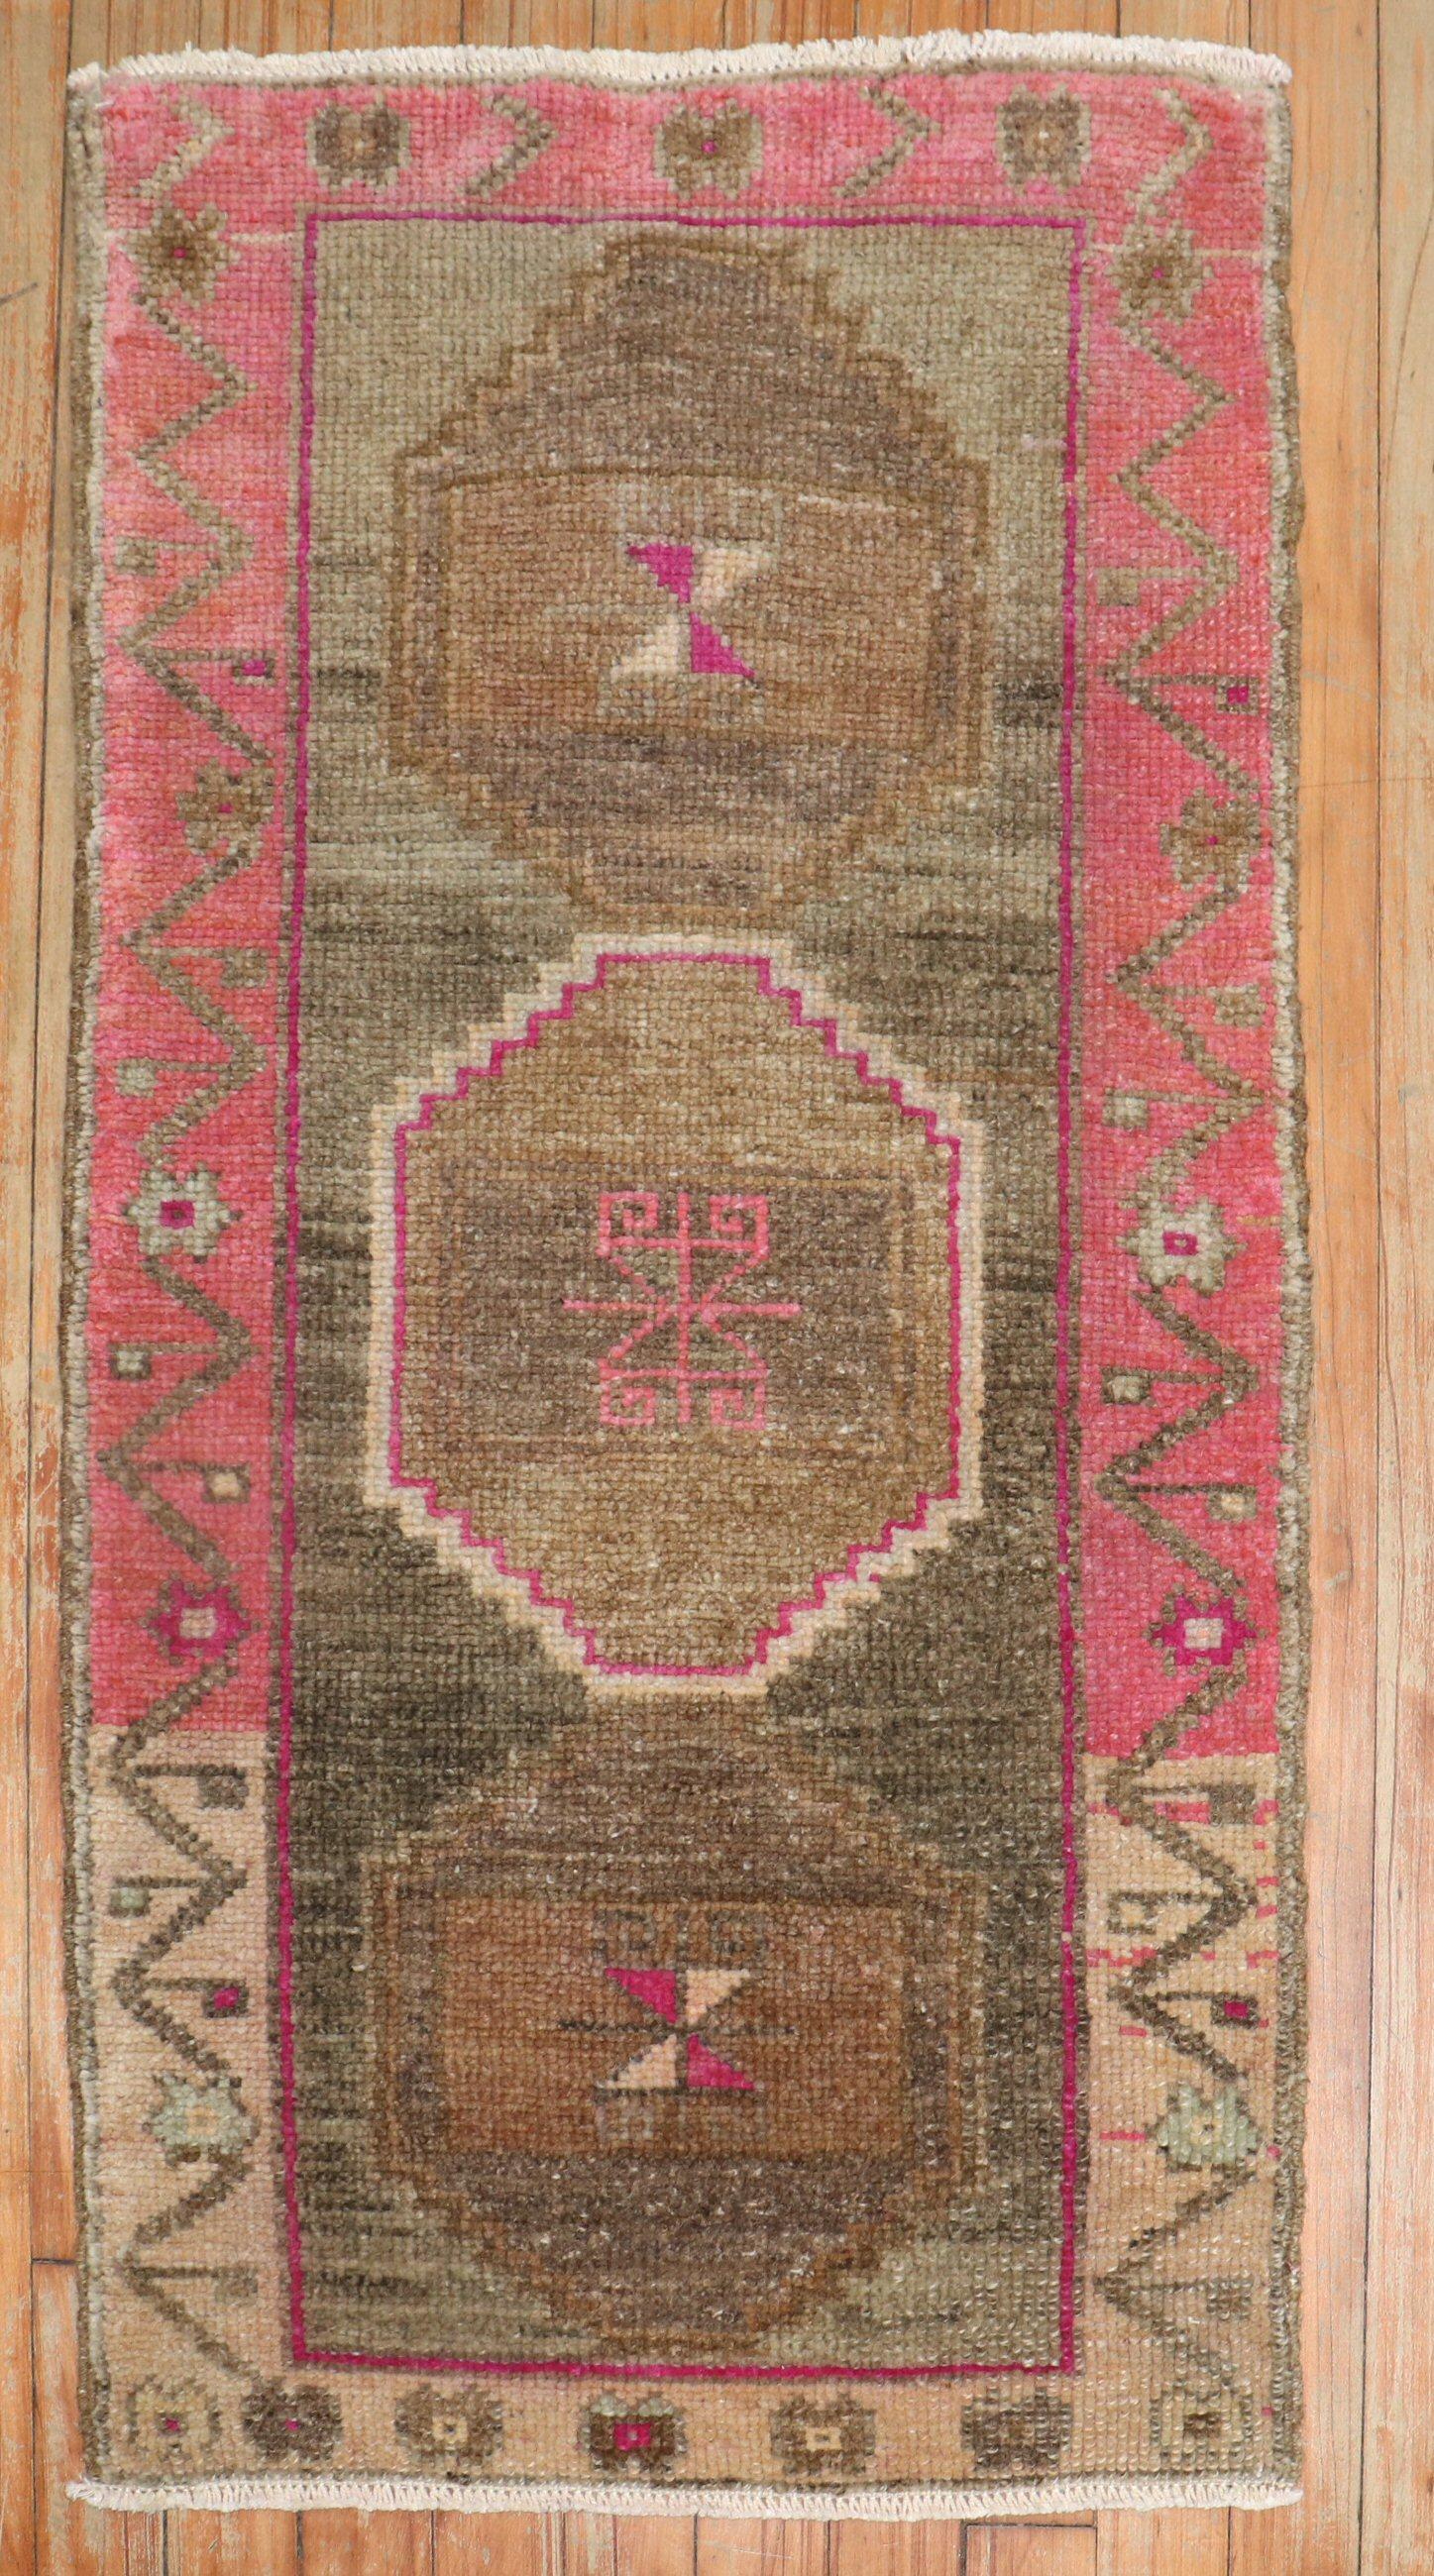 Mid-20th century Tribal Turkish rug in pinks and brown

Measures: 1'9'' x 3'4